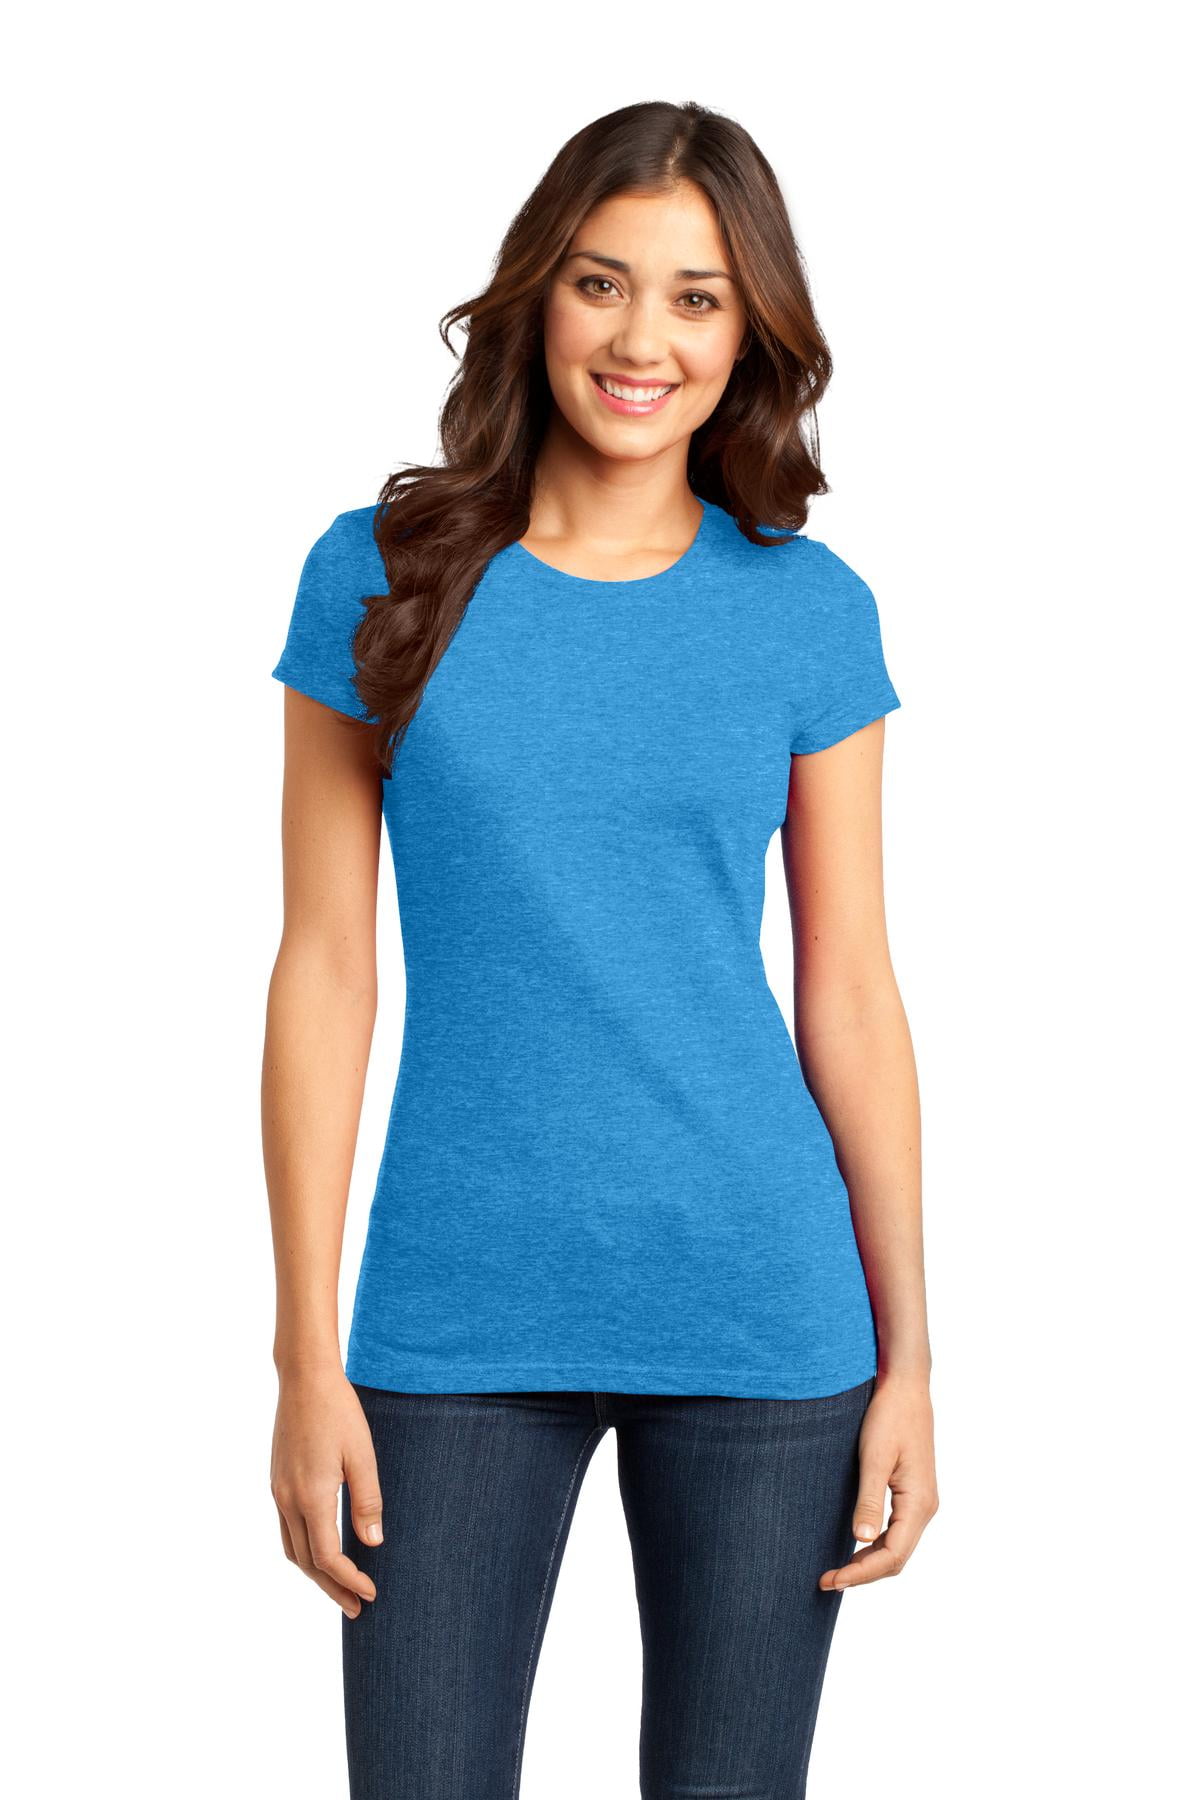 District Women's Fitted Very Important T-Shirt DT6001